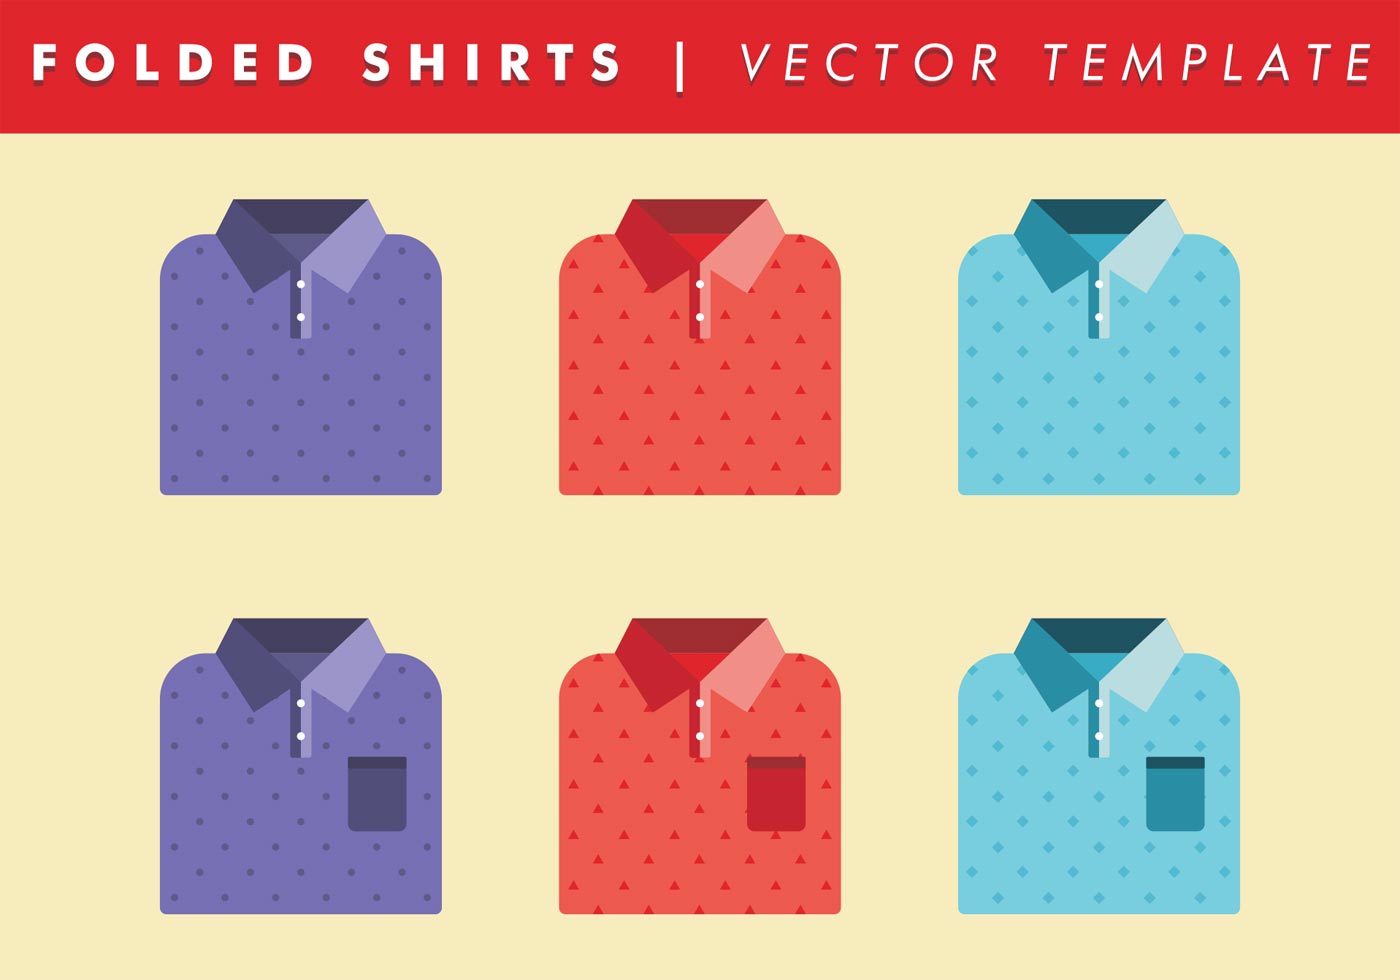 Folded Shirts Template Vector Free 91755 Vector Art At Vecteezy